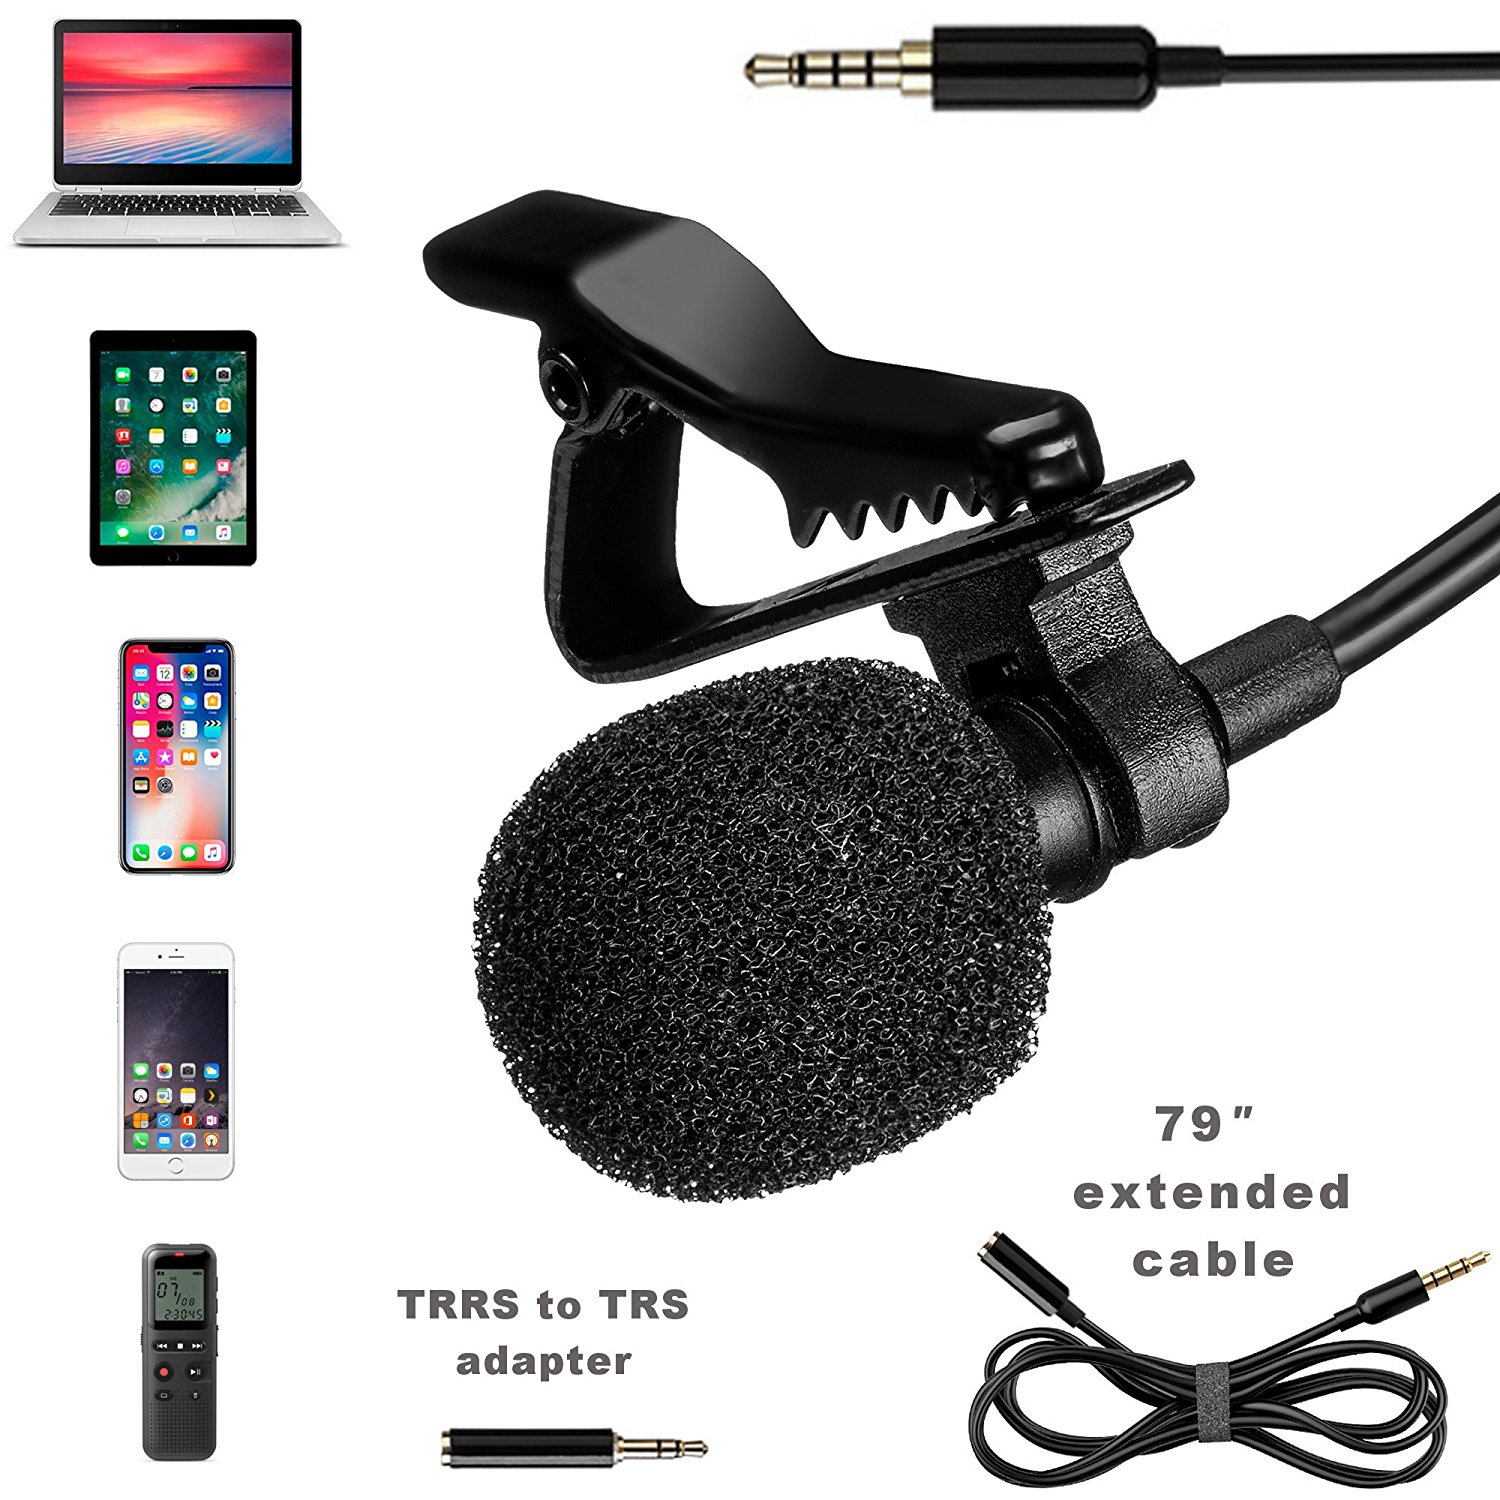 Lavalier Microphone - Professional Lapel Mic For Recording Interview, Podcast, Speech, Vlog, Video, Youtube - External Mic For iPhone, Android, Laptop - Pro Grade Lapel Microphone - Clip-On Microphone